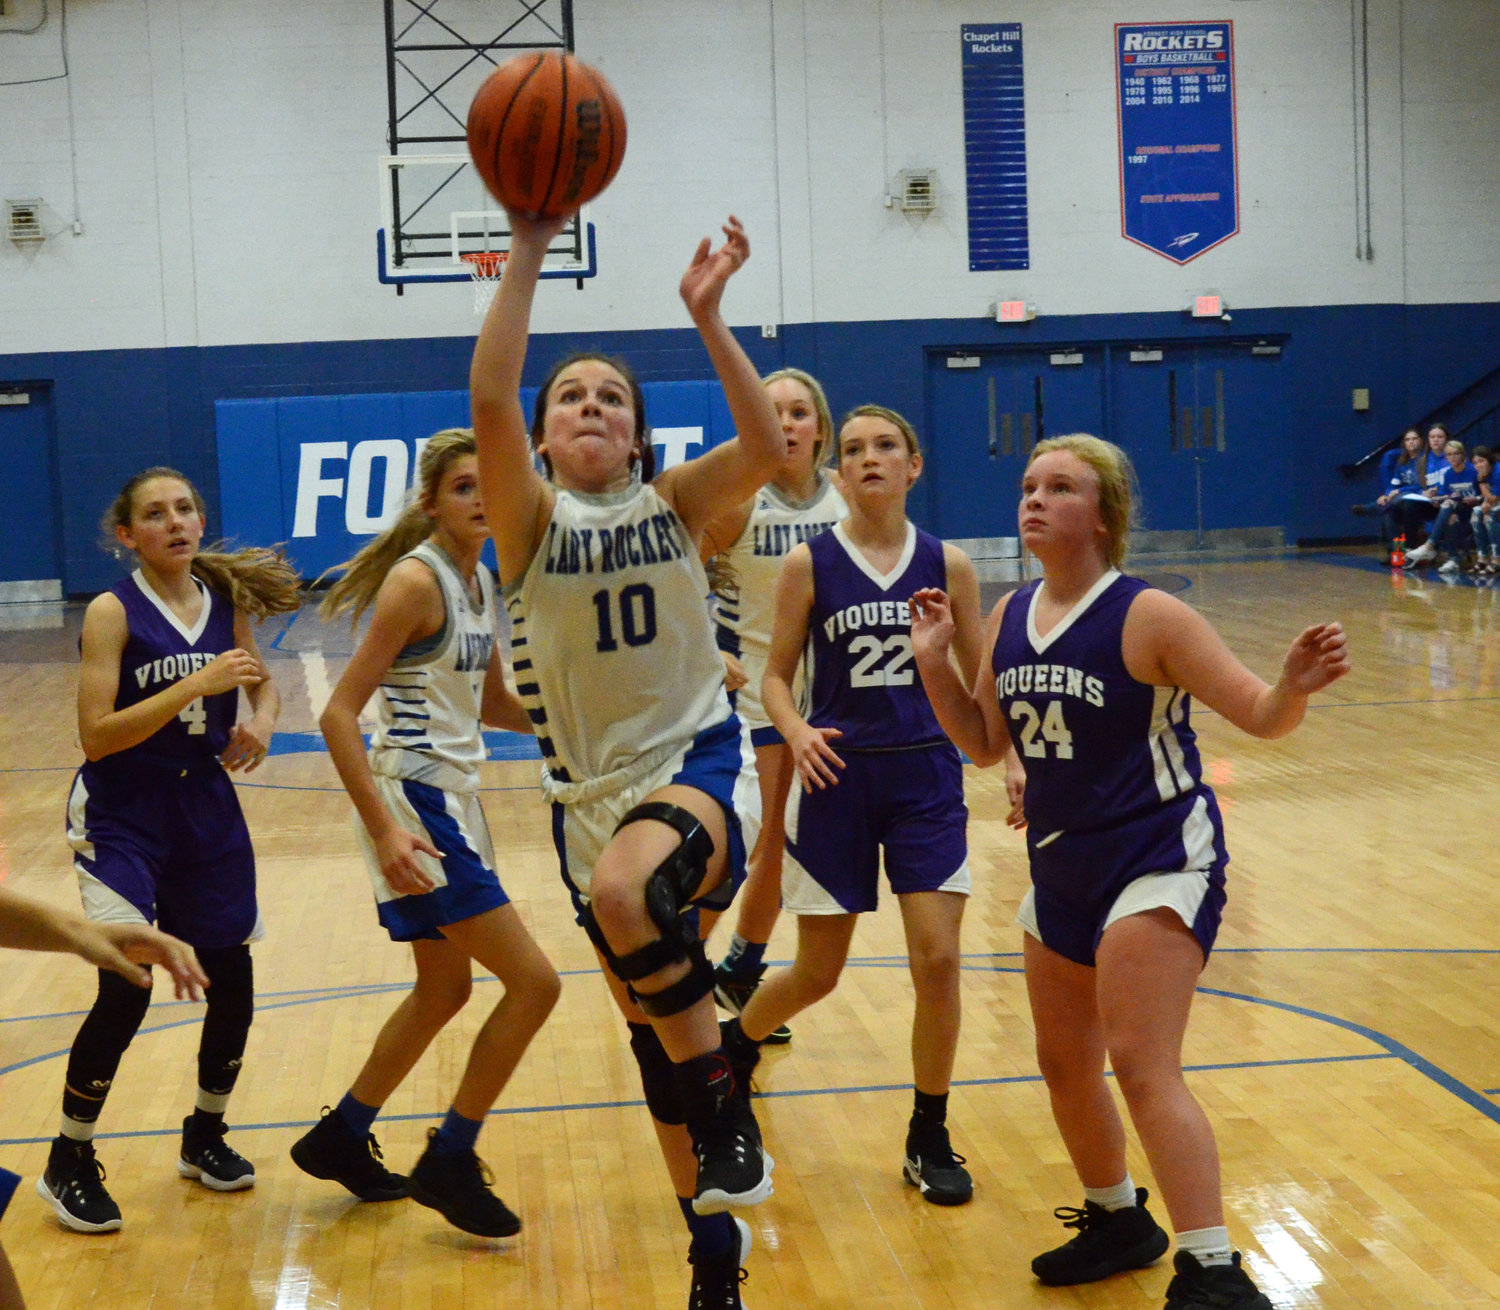 Camreigh Warner (10) drives down the lane for two points in the second quarter for the Lady Rockets.